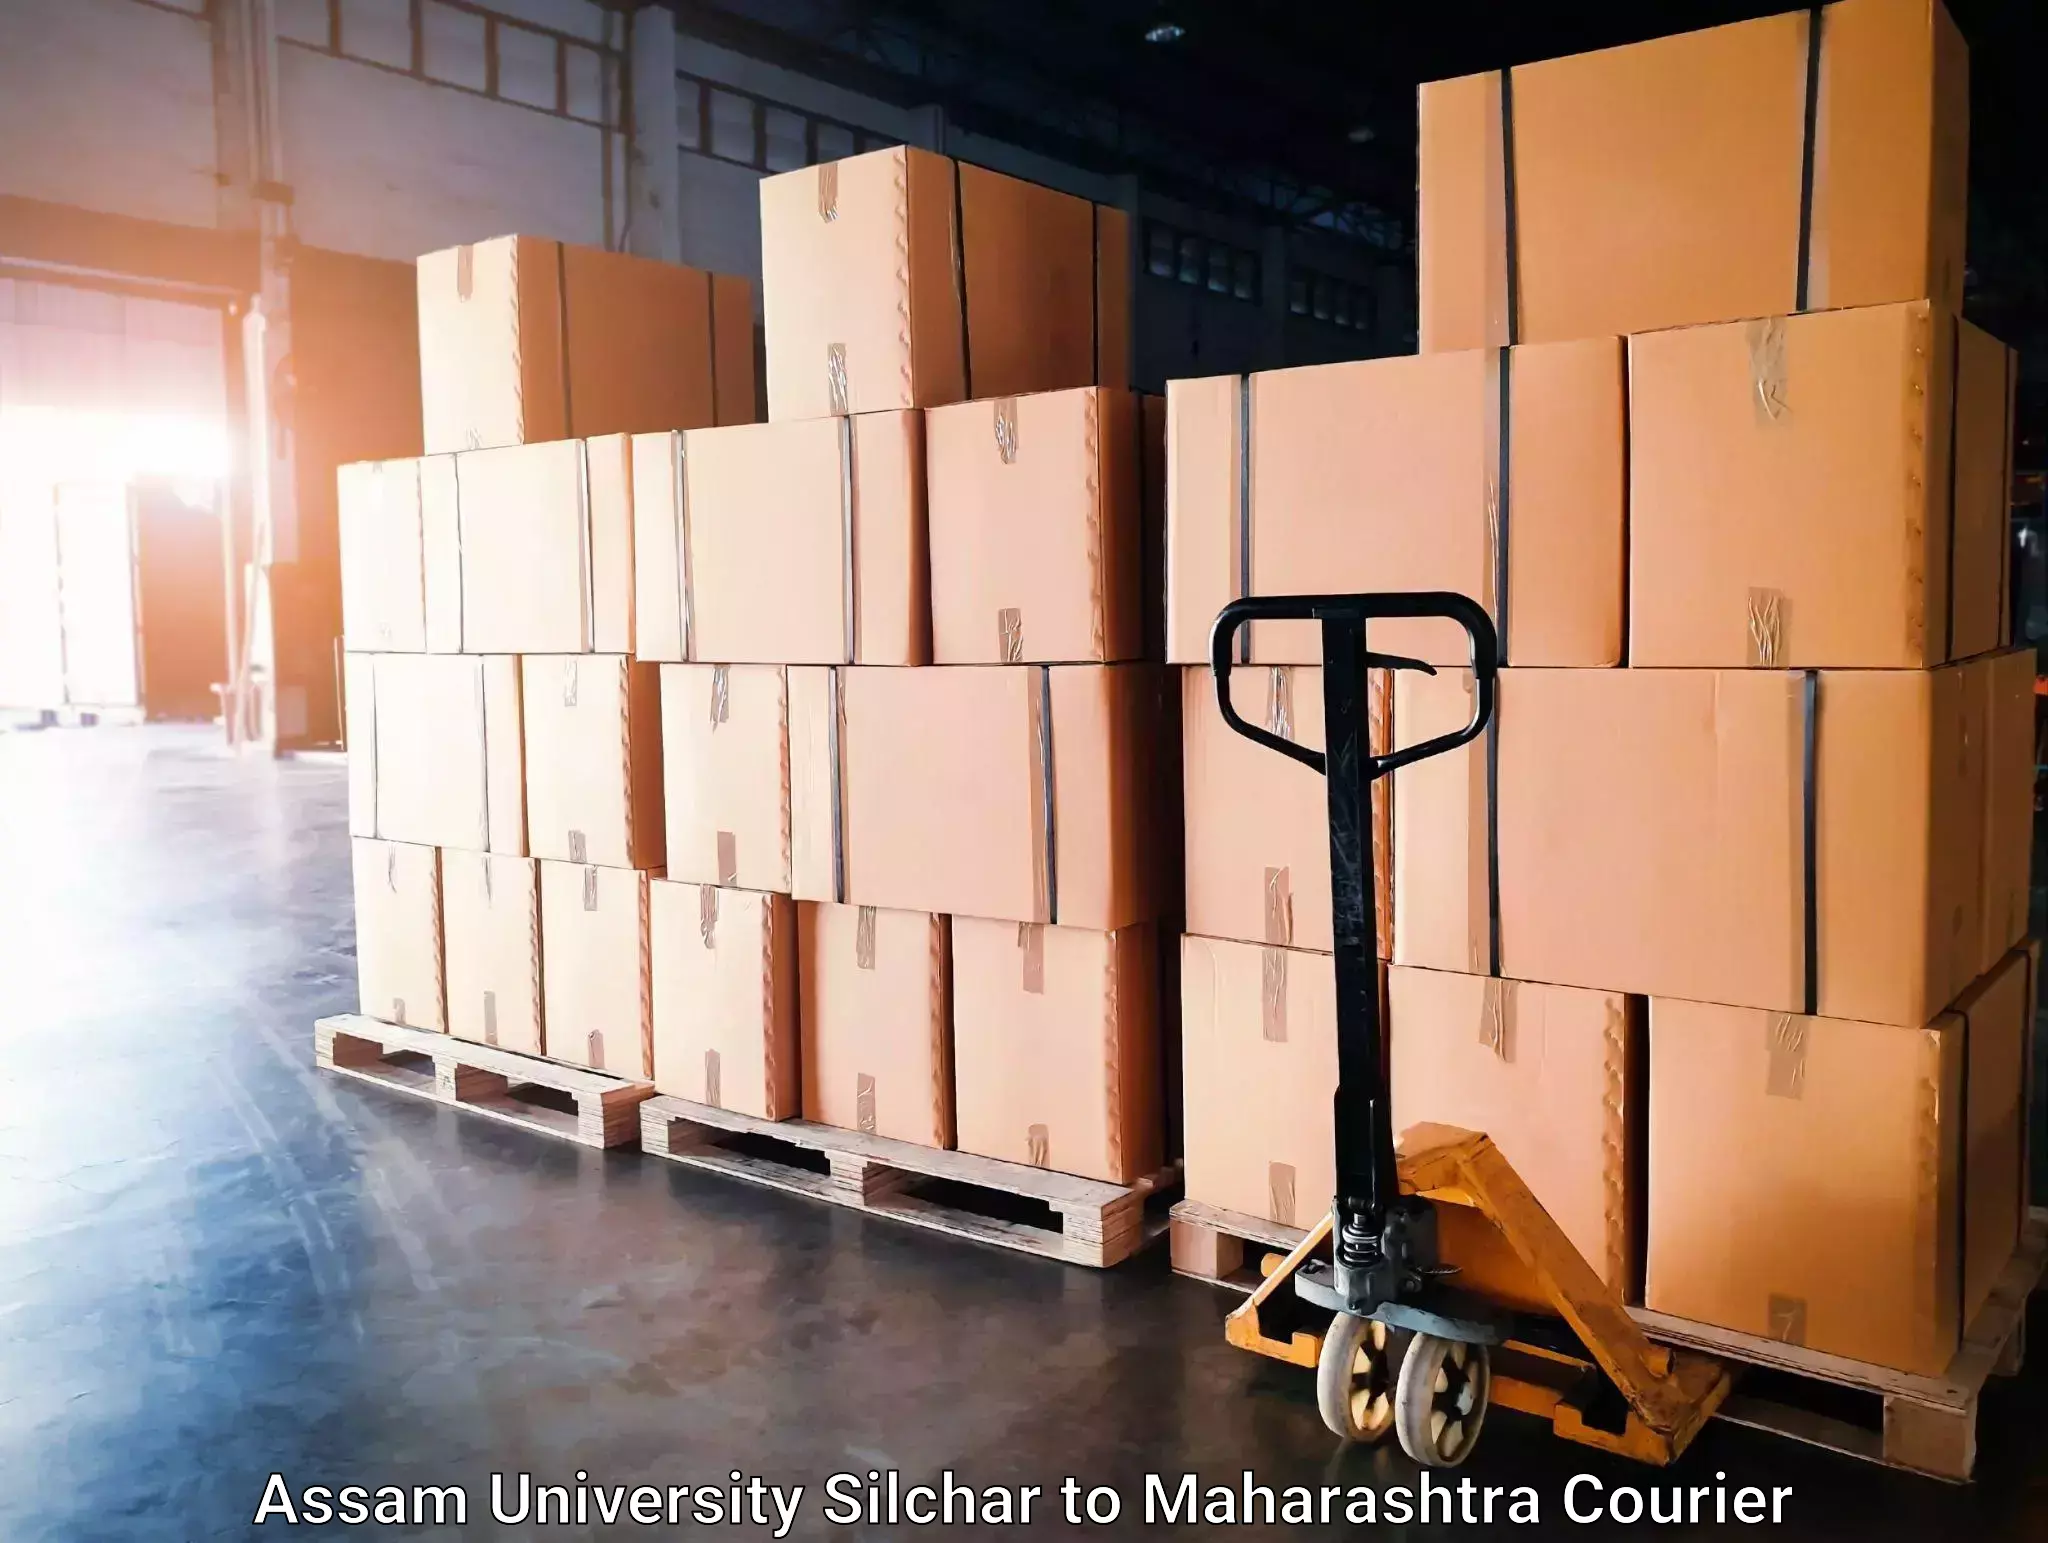 Track and trace shipping Assam University Silchar to Tata Institute of Social Sciences Mumbai